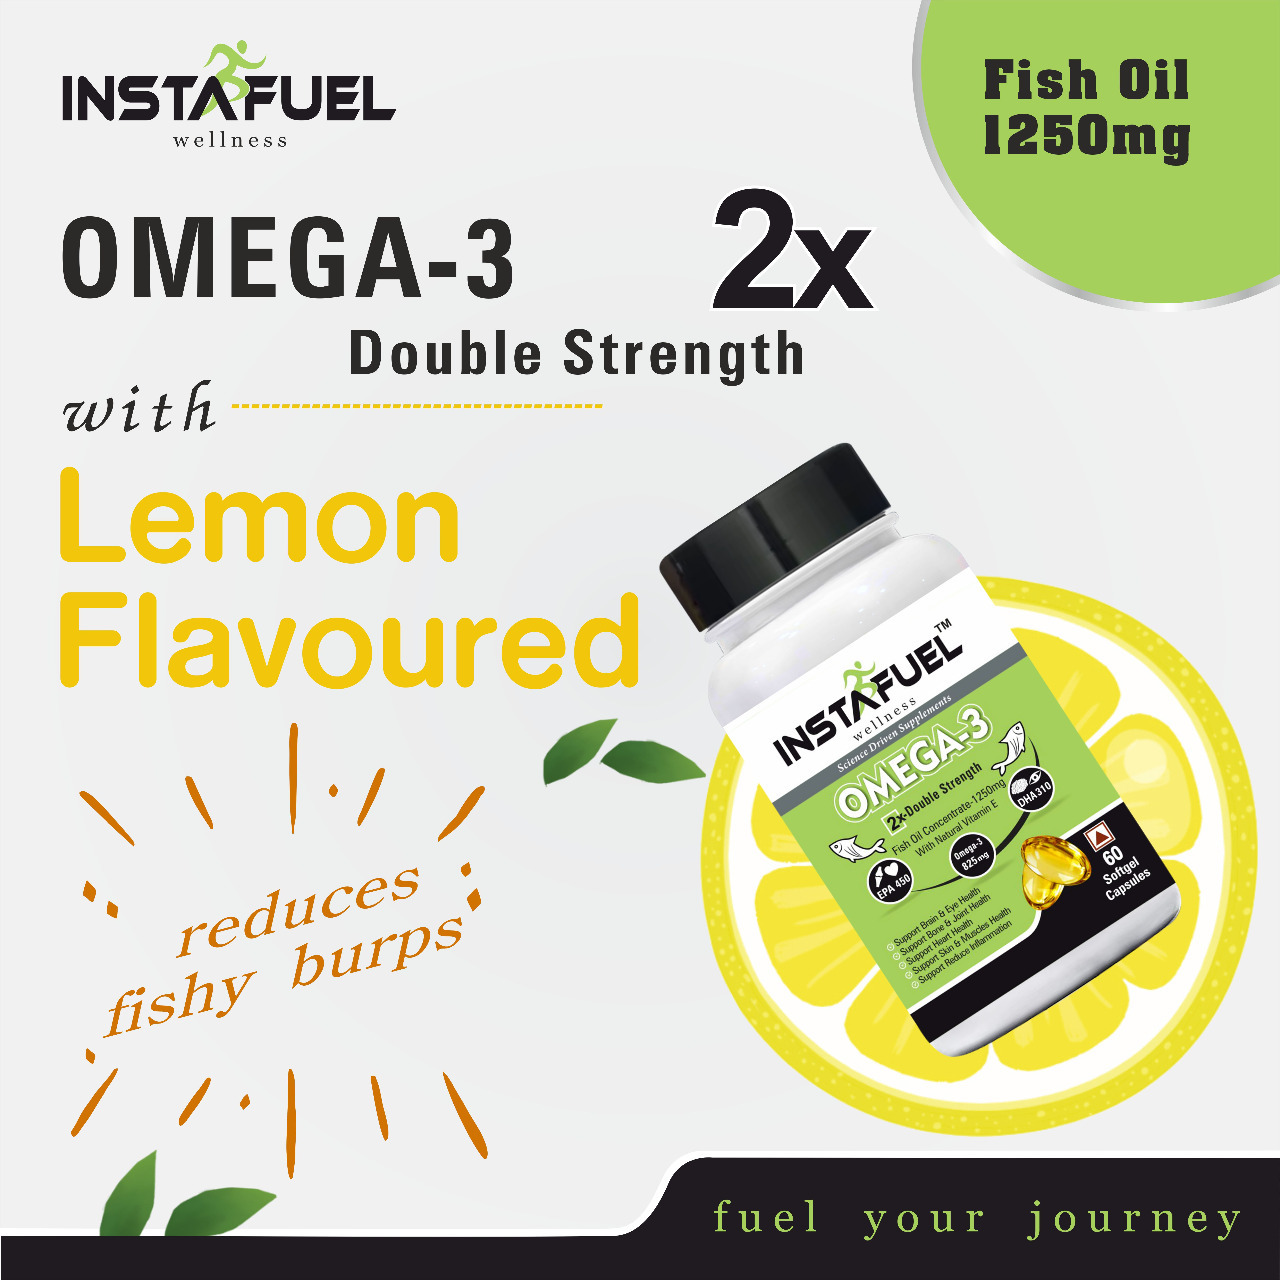 Omega 3 Fish Oil 2X Double Strength 1250mg Contains 450mg EPA 310mg DHA with Other Omega 3 Fatty Acid 65mg 60 Softgel Capsules